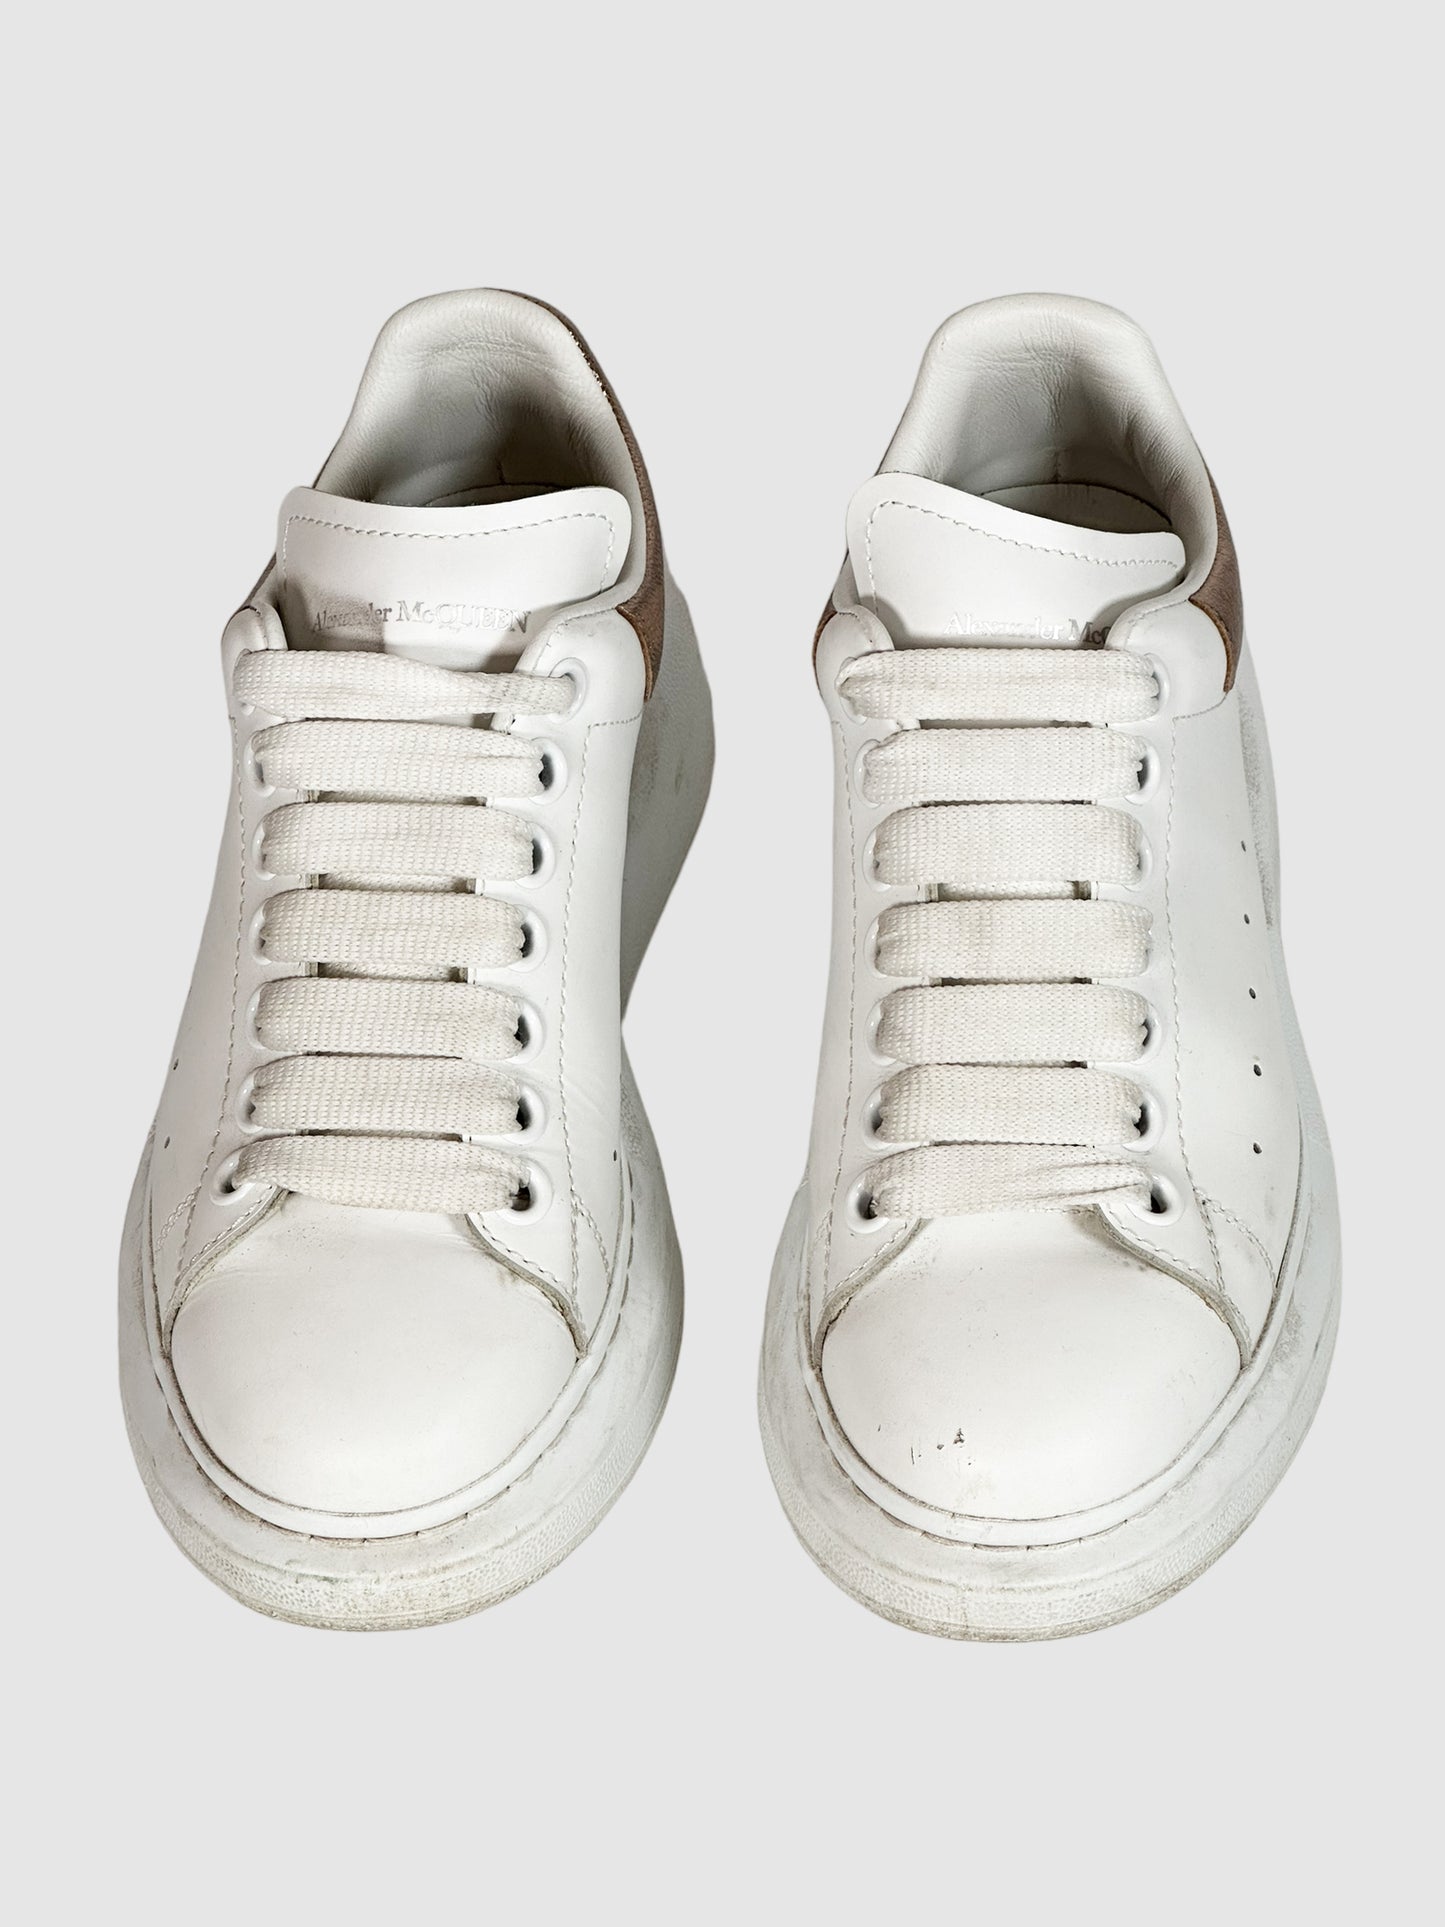 Larry Wedge Sneakers - Size 36